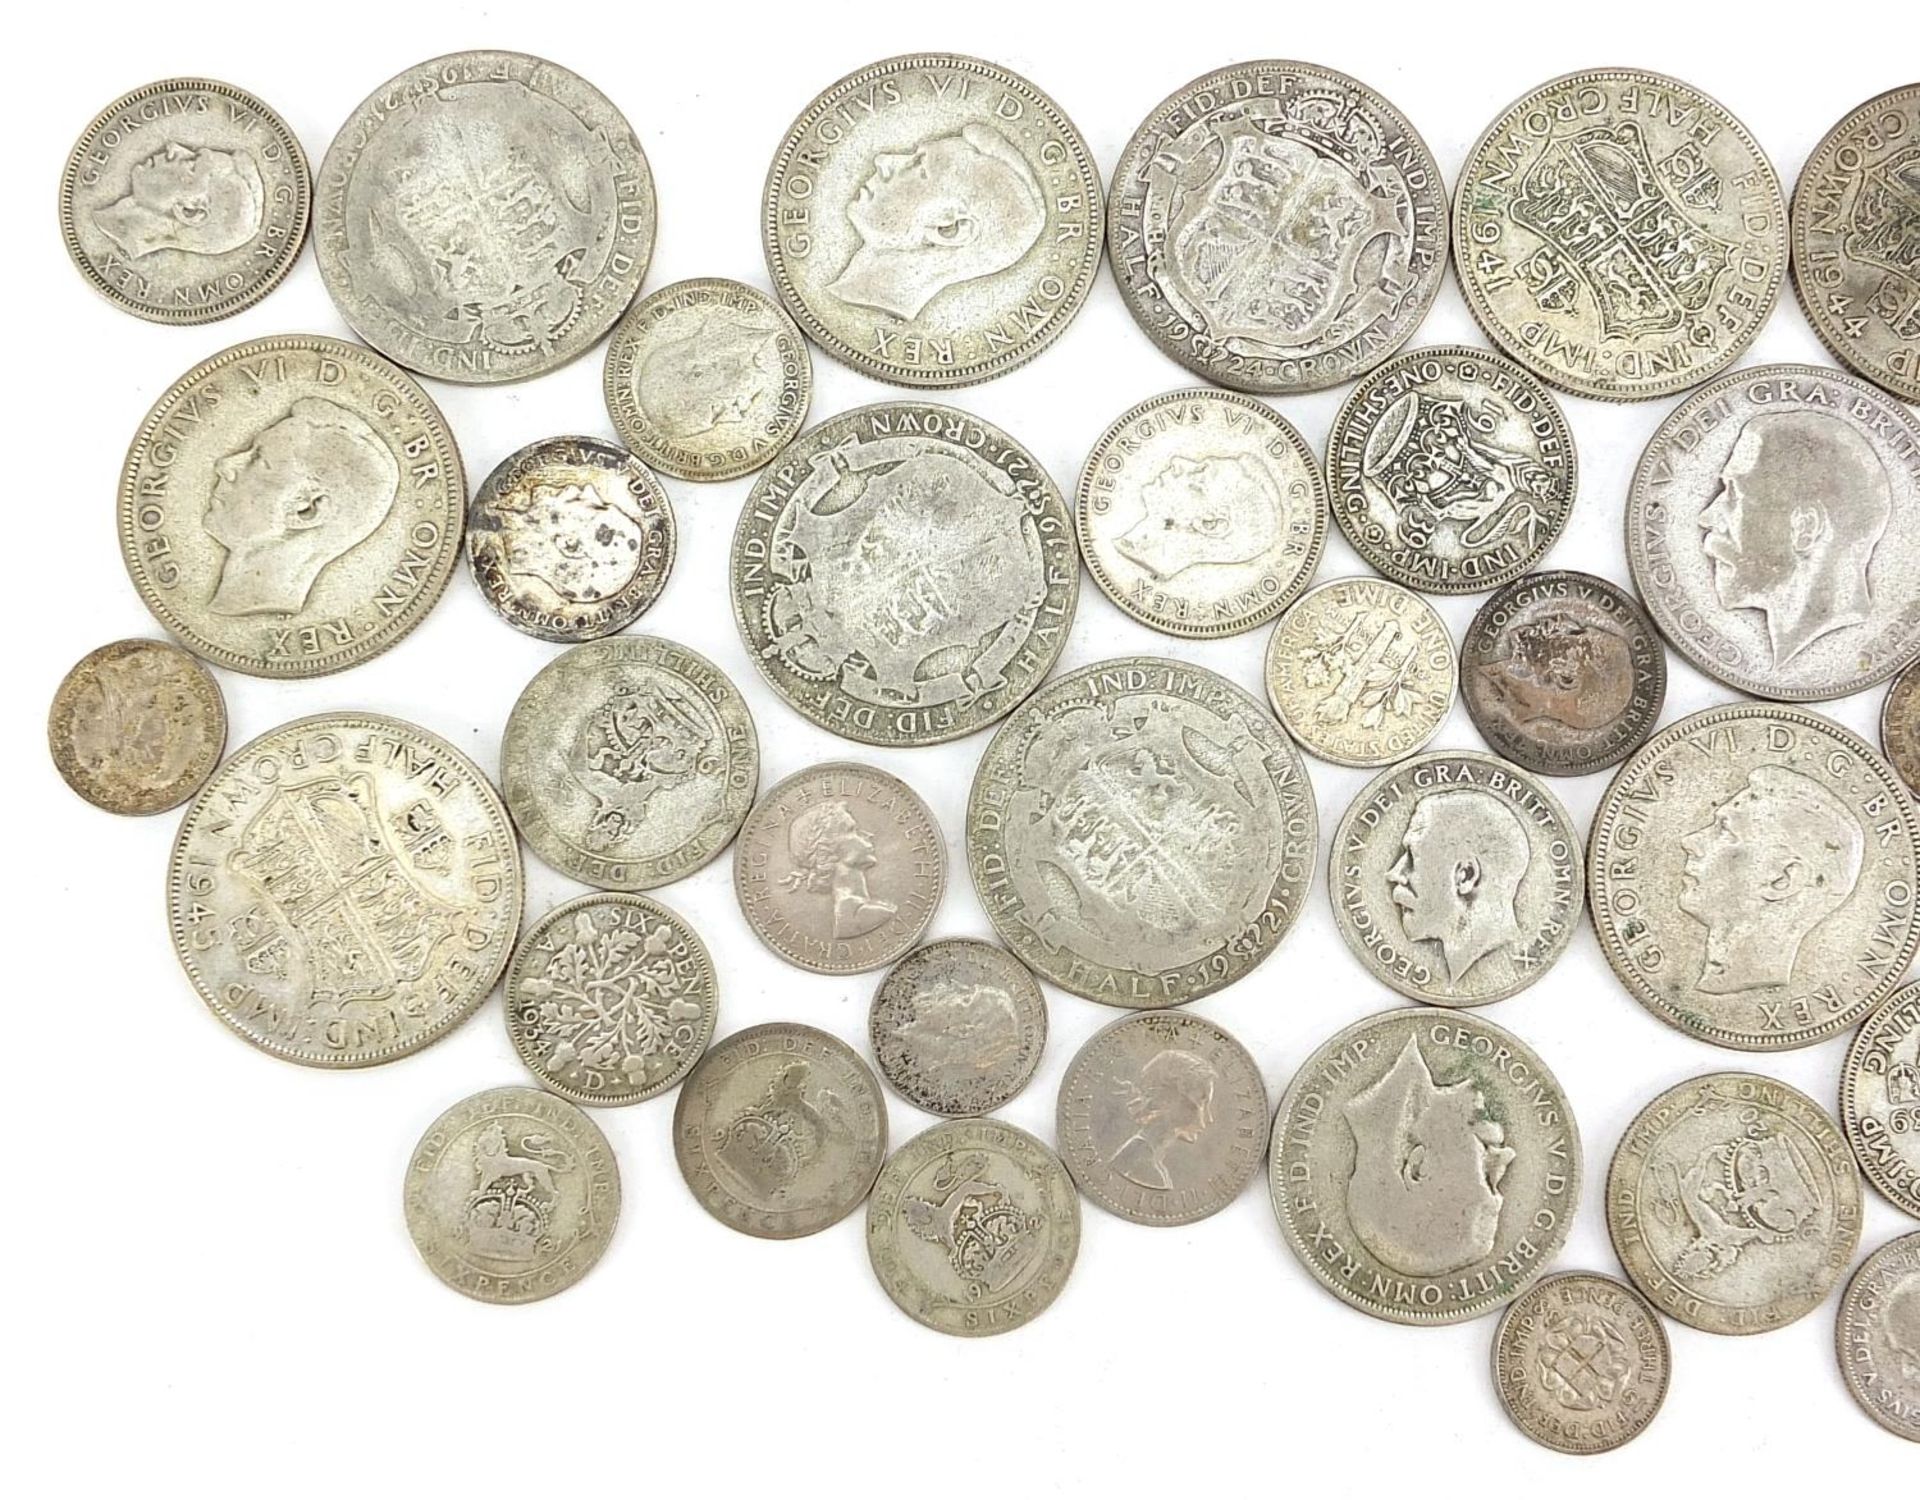 British pre 1947 coinage including half crowns and sixpences - Image 2 of 3